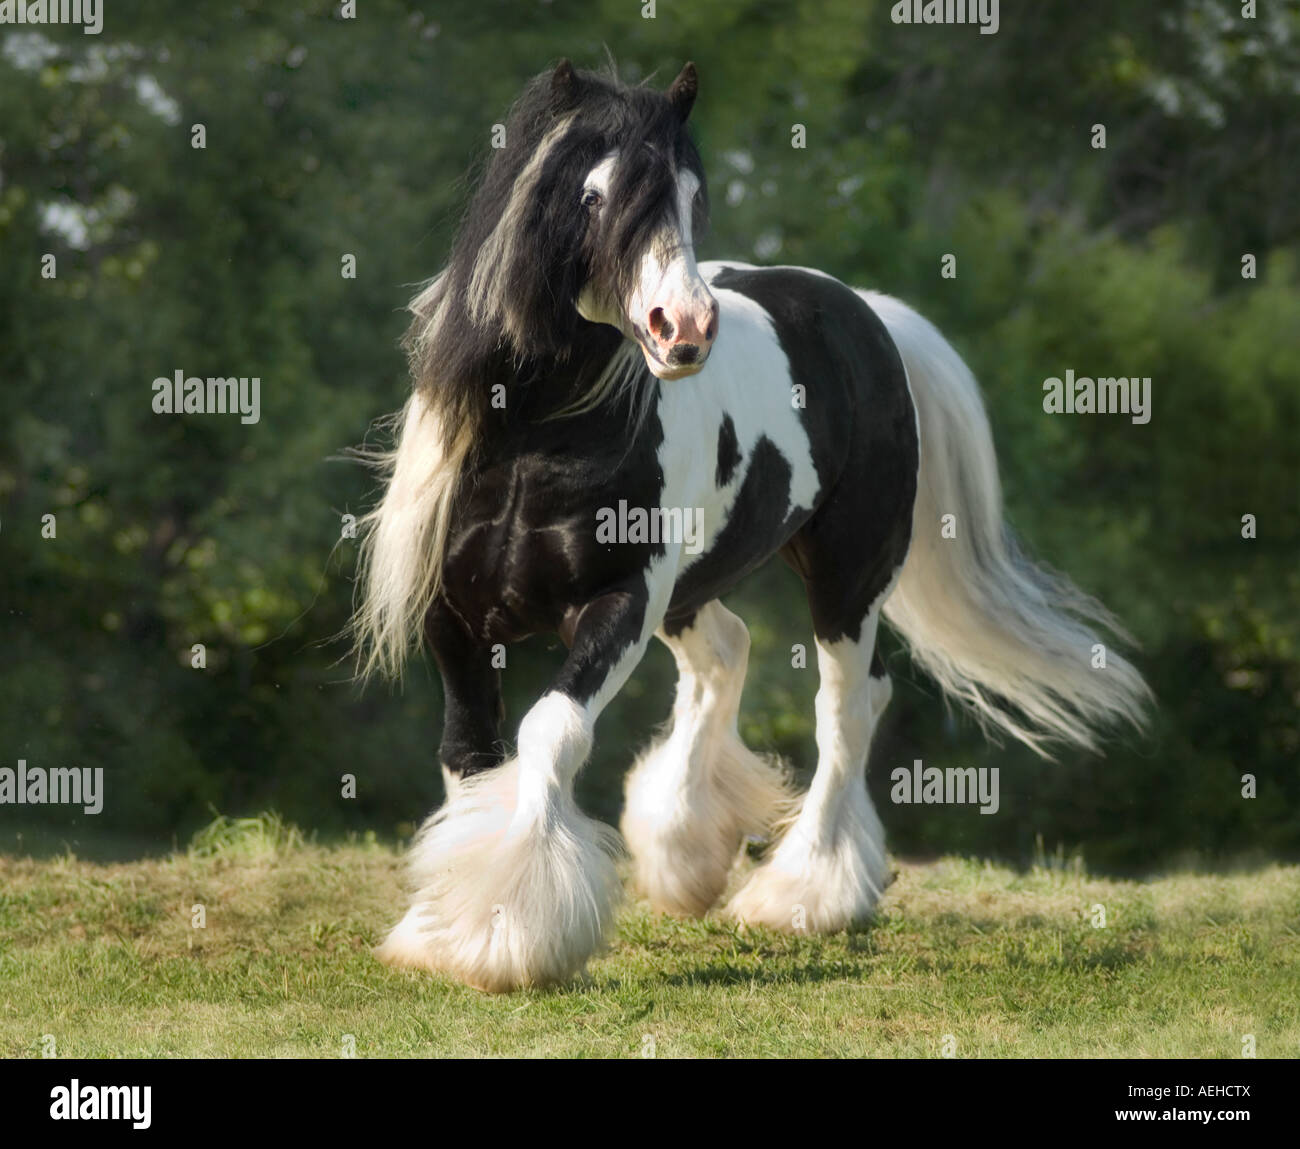 Gypsy Vanner Horse stallion runs toward us with tail, mane anf feathers flying Stock Photo